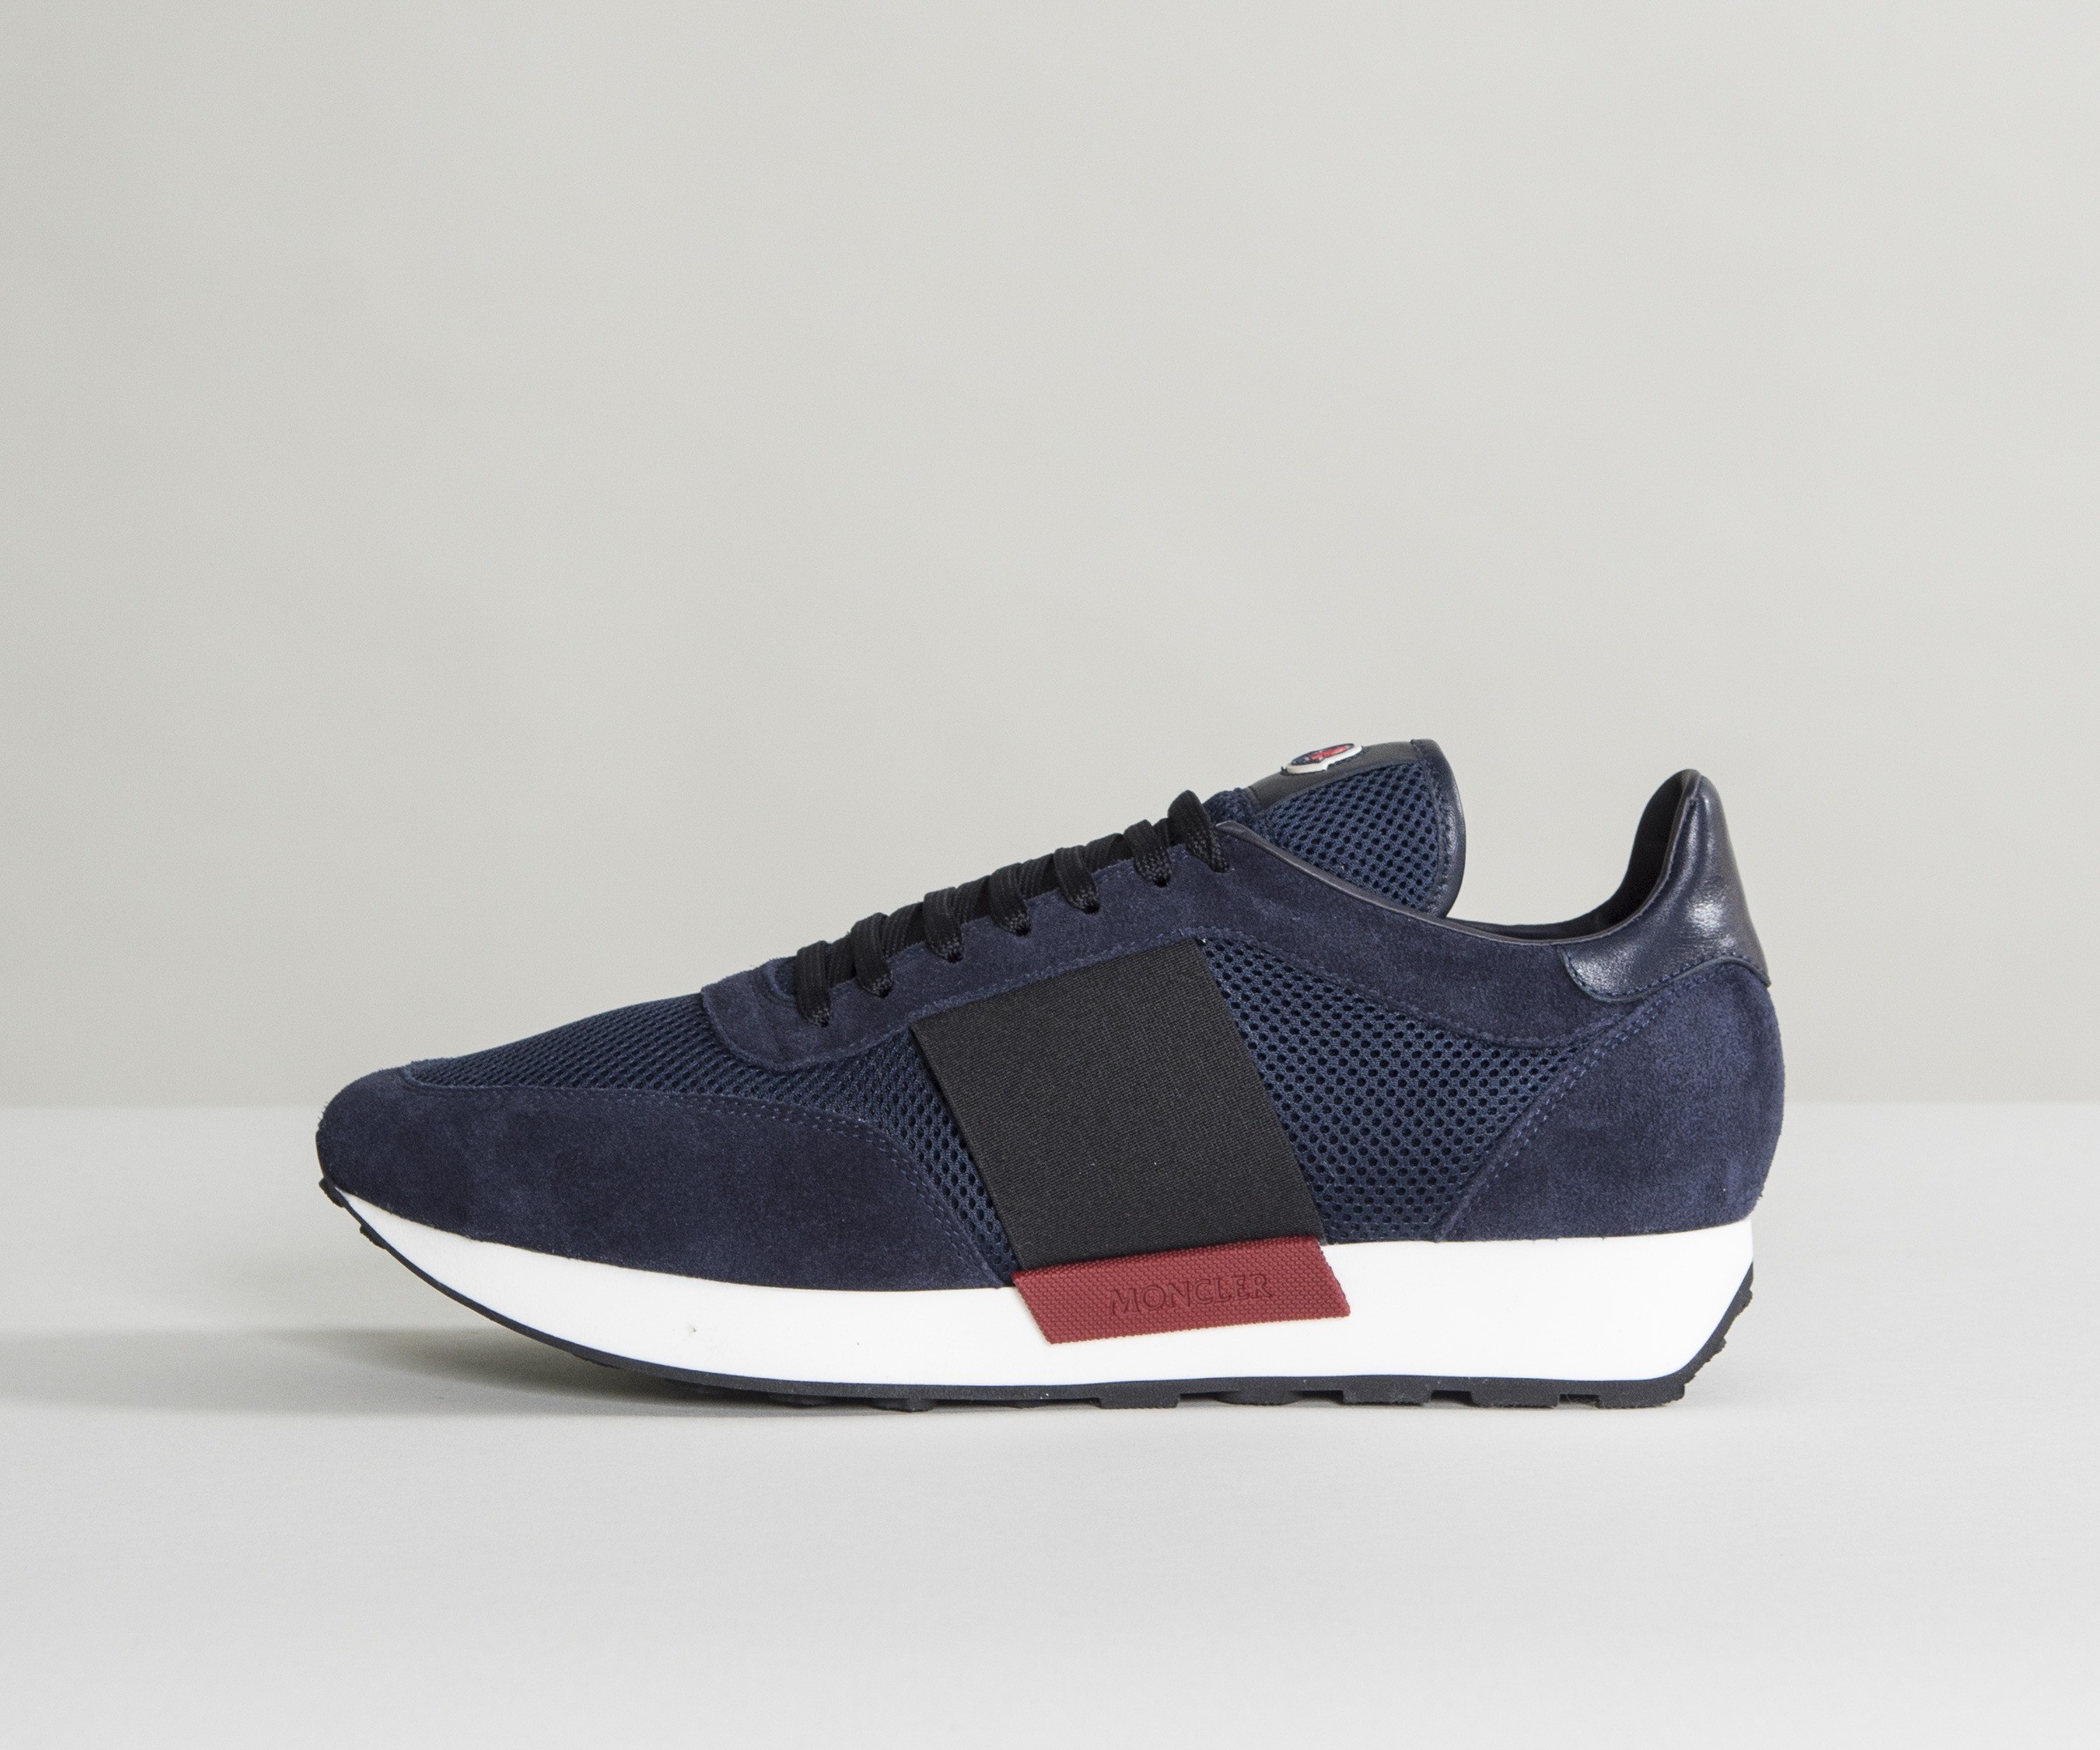 Moncler 'Horace' Suede & Mesh Trainers Navy